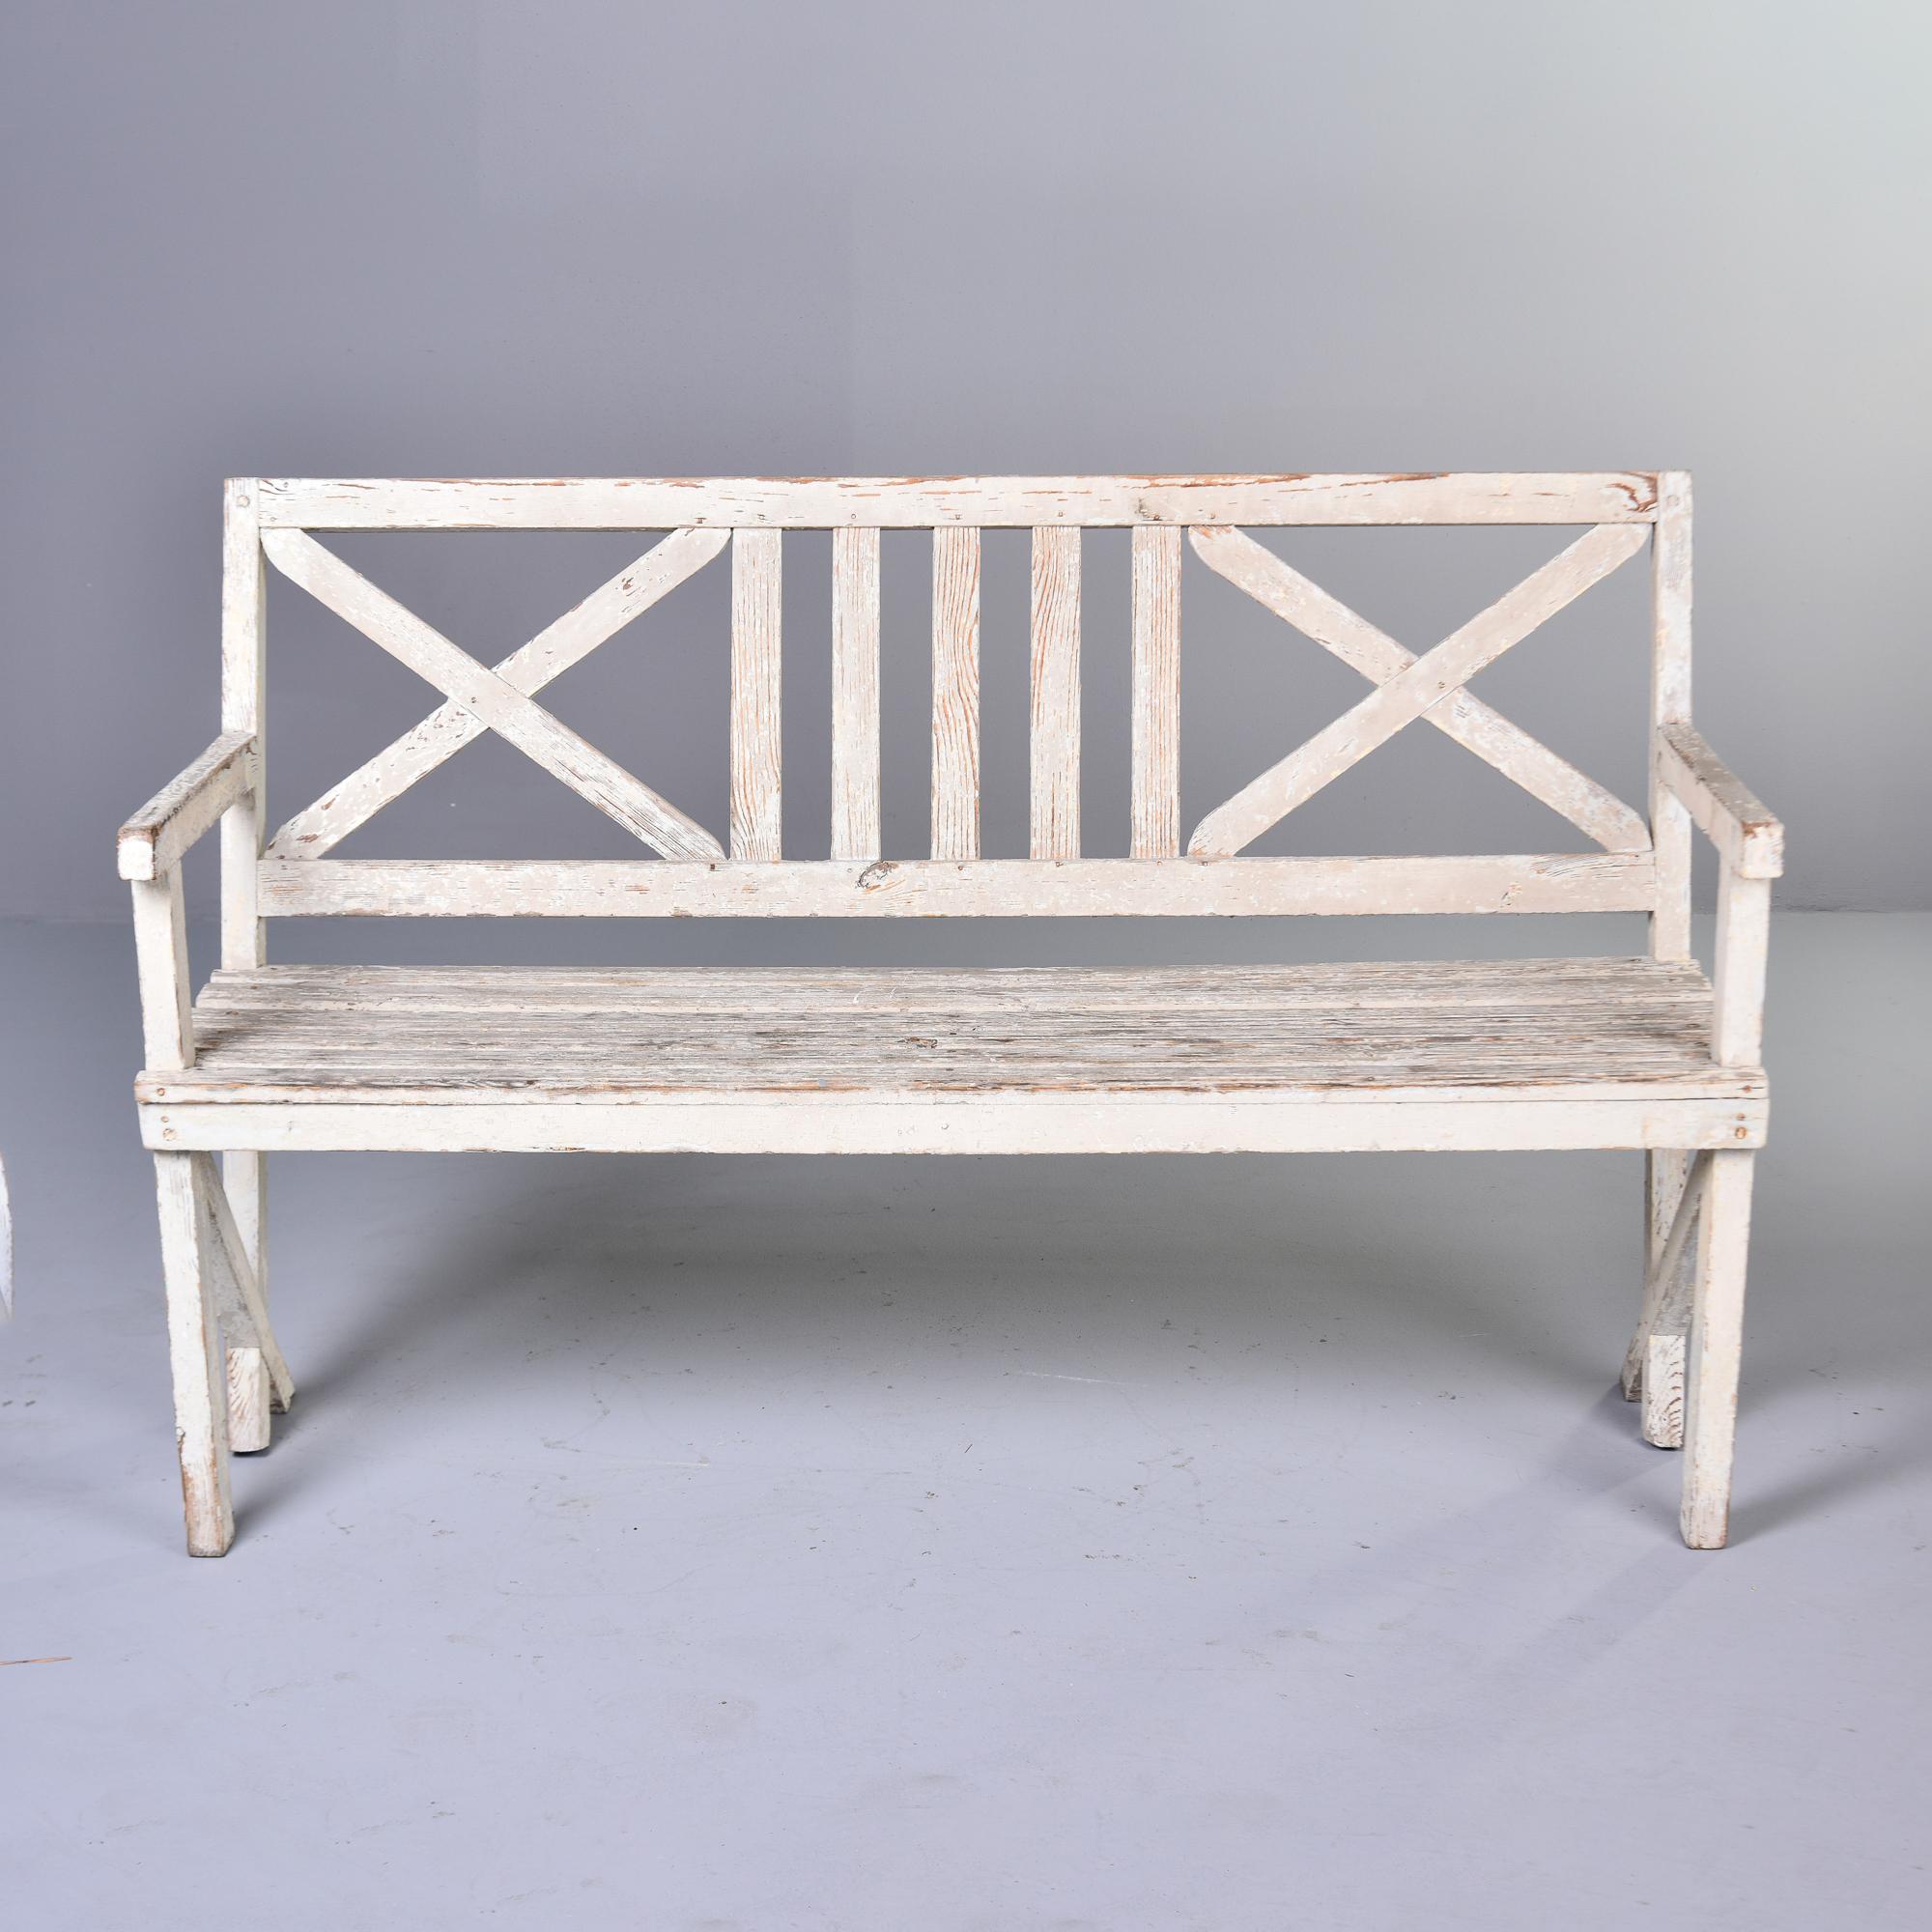 Found in England, this white painted bench dates from the 1920s. Wooden bench has weathered white paint, double X-form seat back, arms and a slatted seat. Unknown maker. 

Arm Height:  28     Seat Height:  18.75
Seat Depth:  16”     Seat Width: 